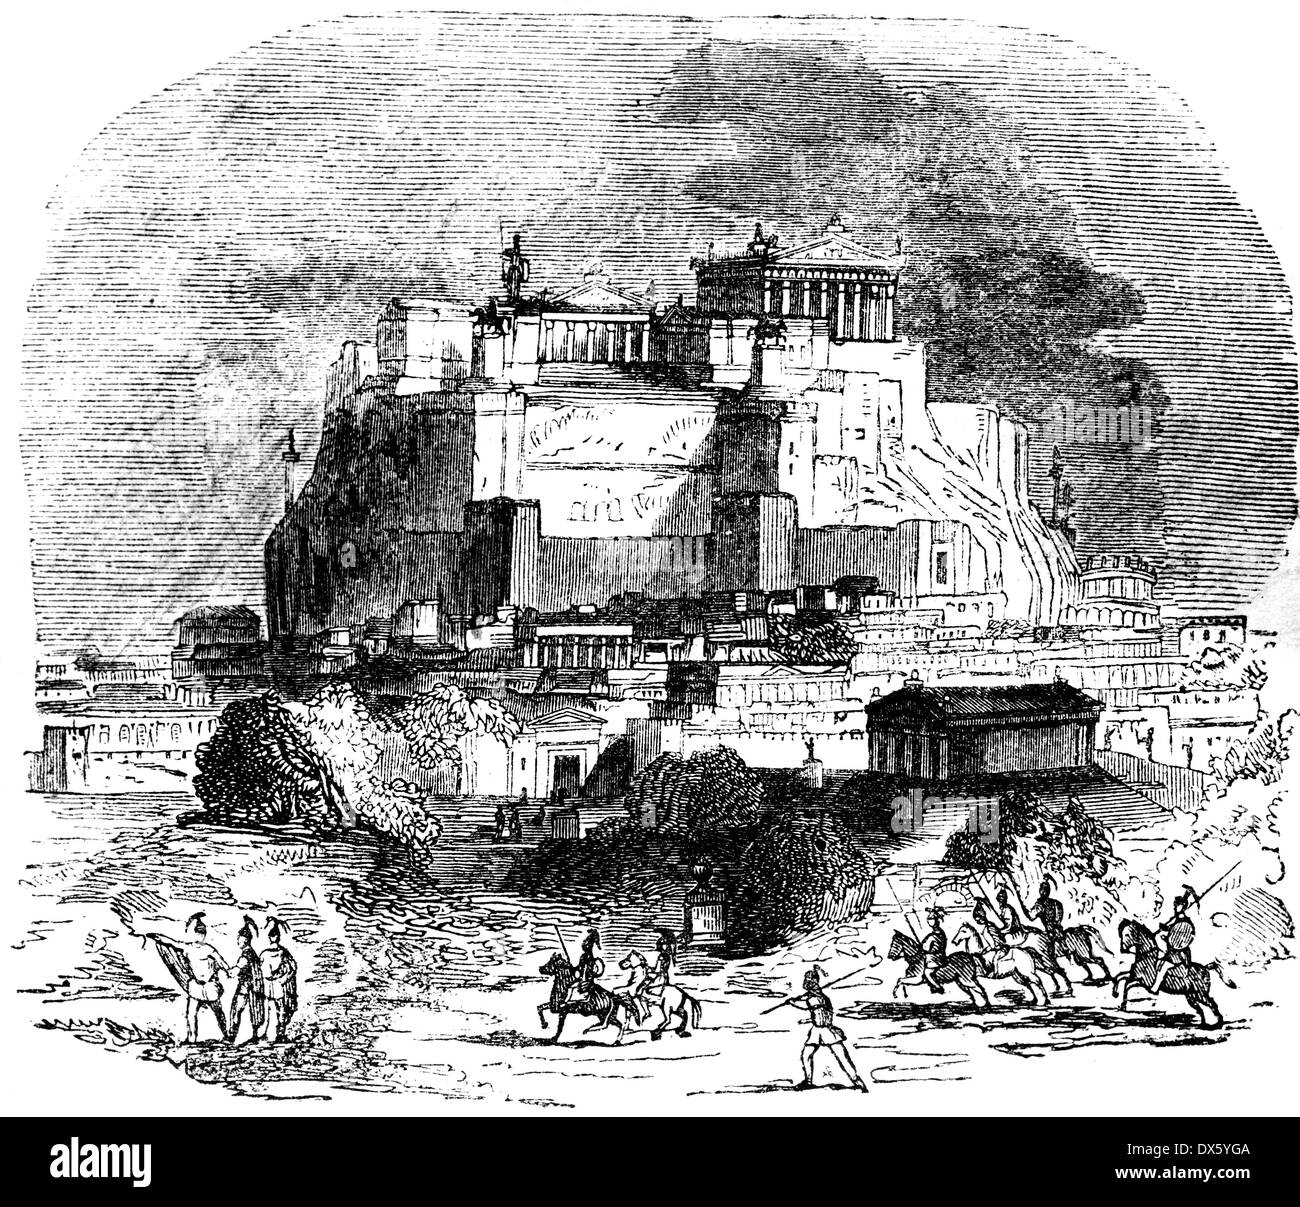 View of Ancient Athens, Greece, illustration from book dated 1878 Stock Photo